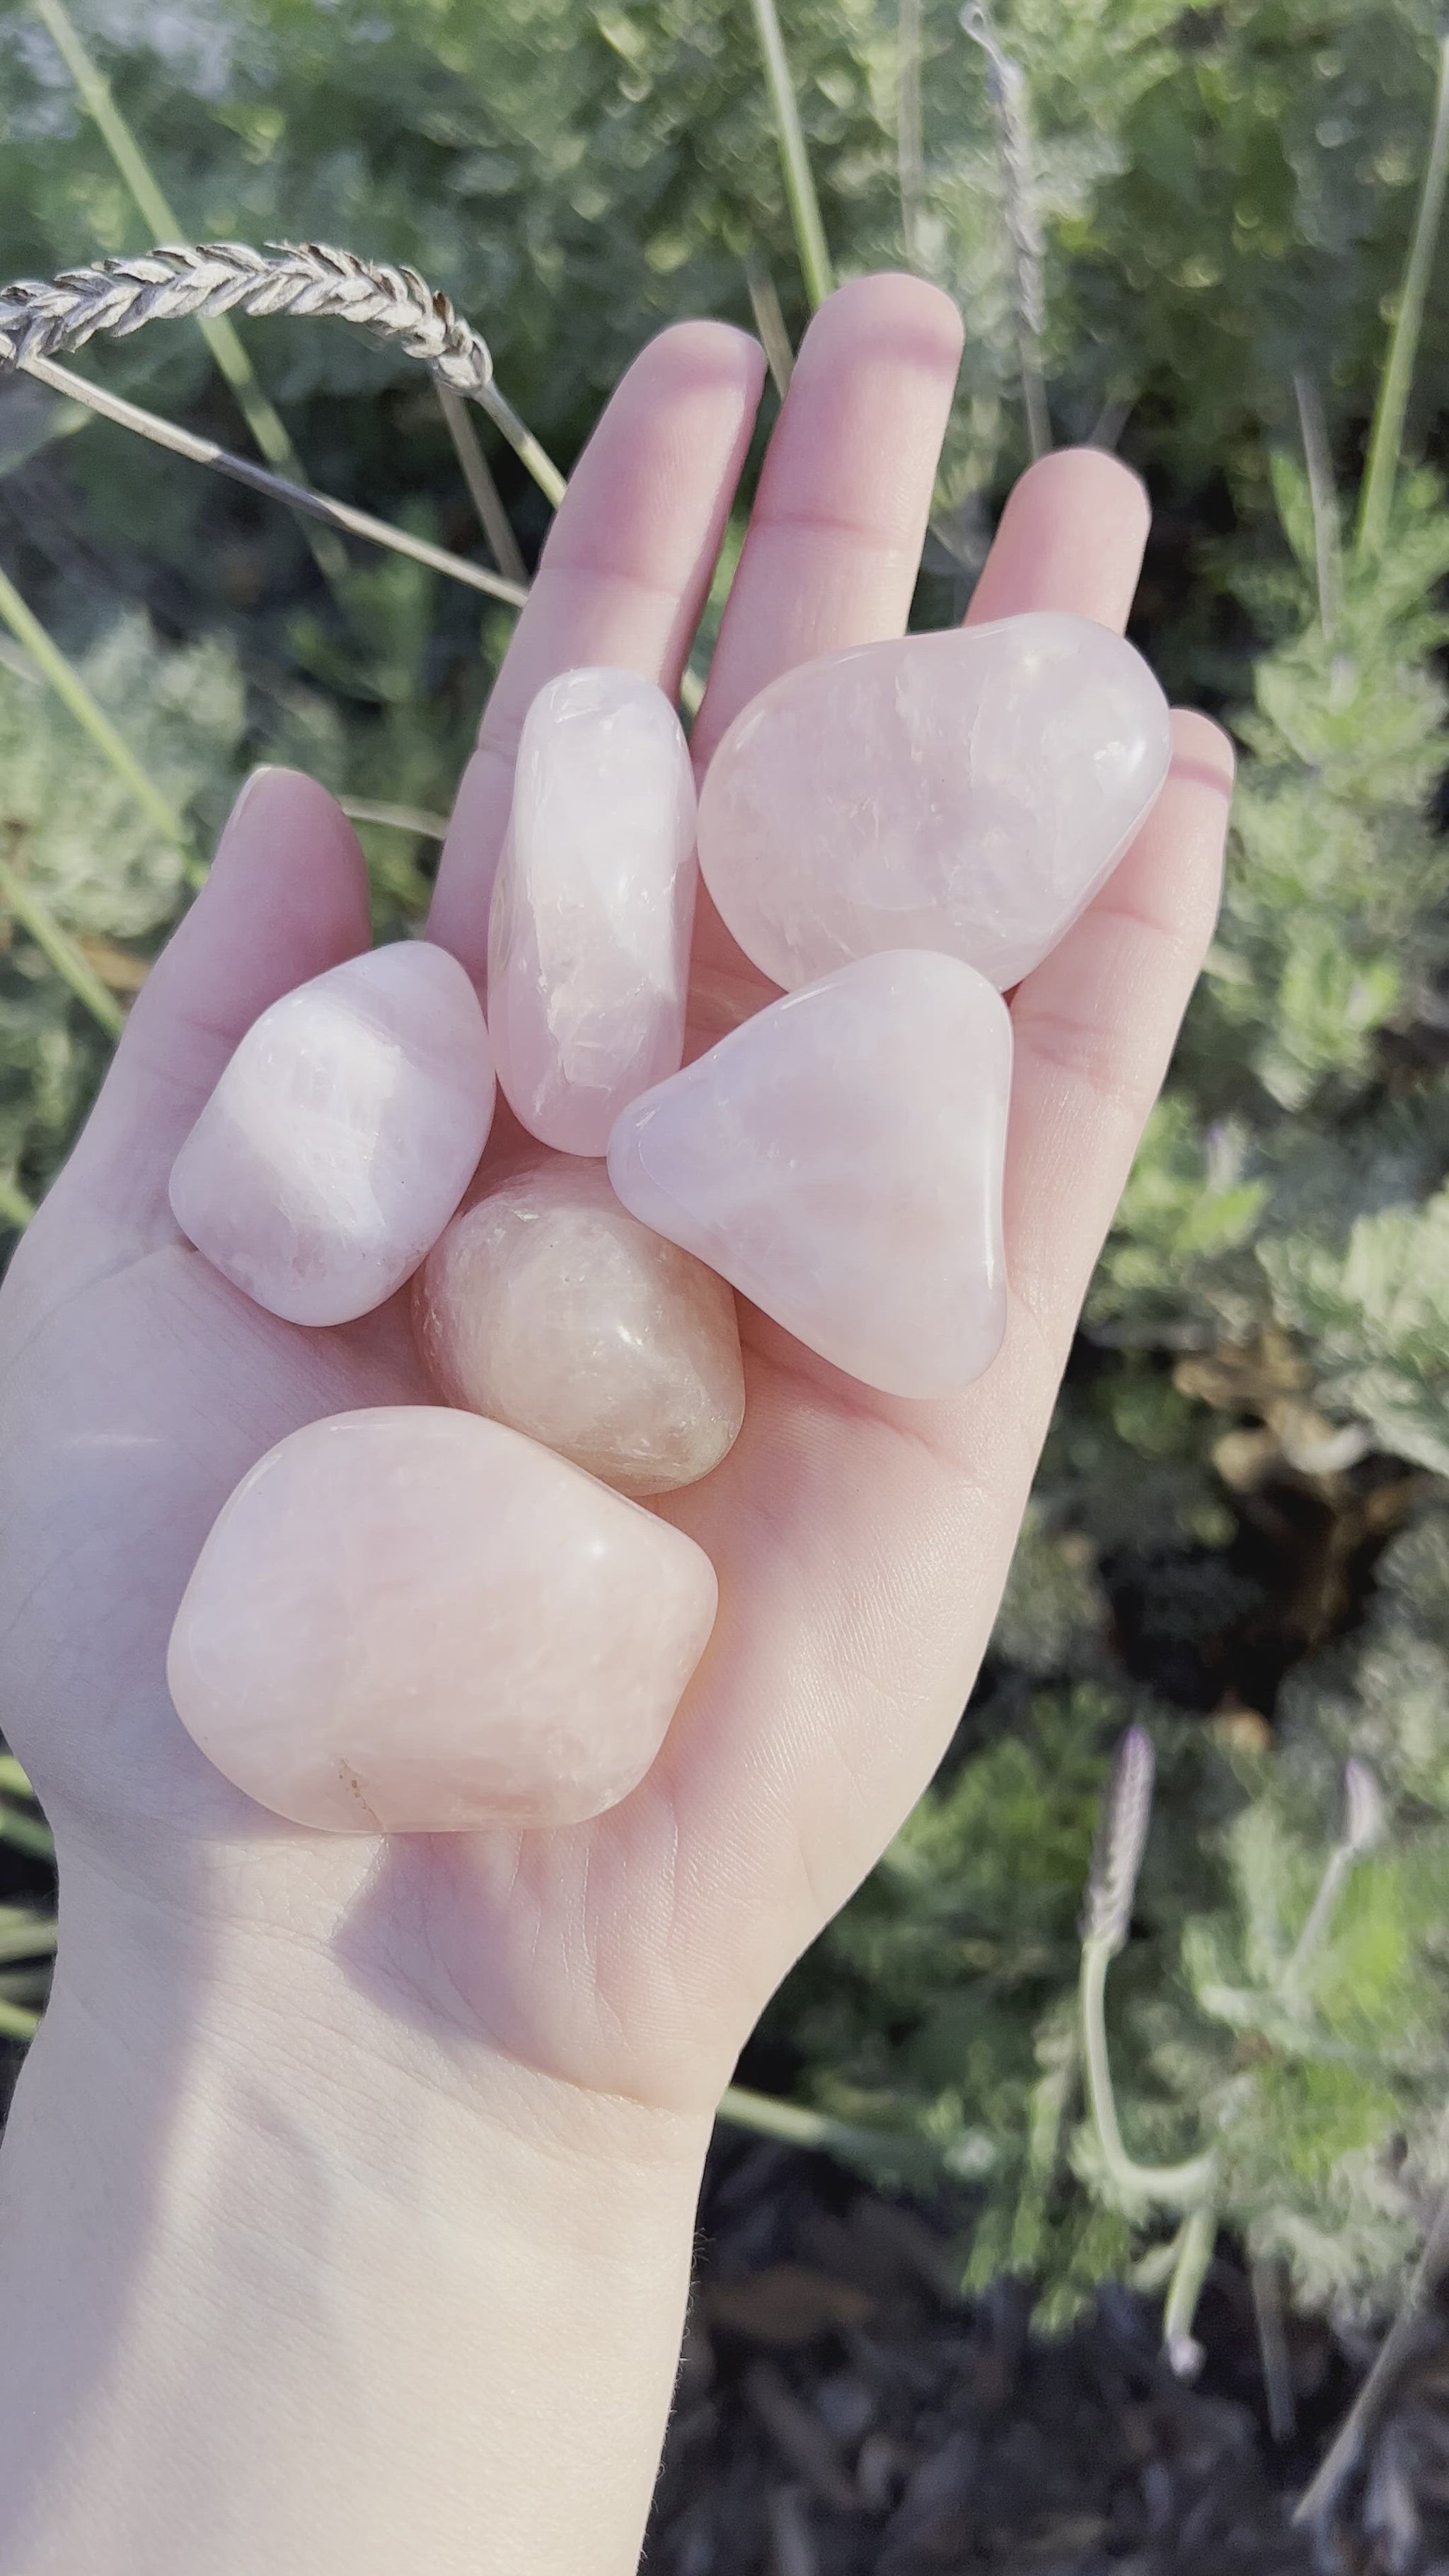 This listing is for one (1) Rose Quartz Tumble. Rose Quartz purifies and opens the heart to promote love, self-love, friendship, deep inner healing and feelings of peace. Calming and reassuring, it helps to comfort in times of grief. Origin: Brazil Size: 1.2 inches to 1.5 inches (30-40mm)